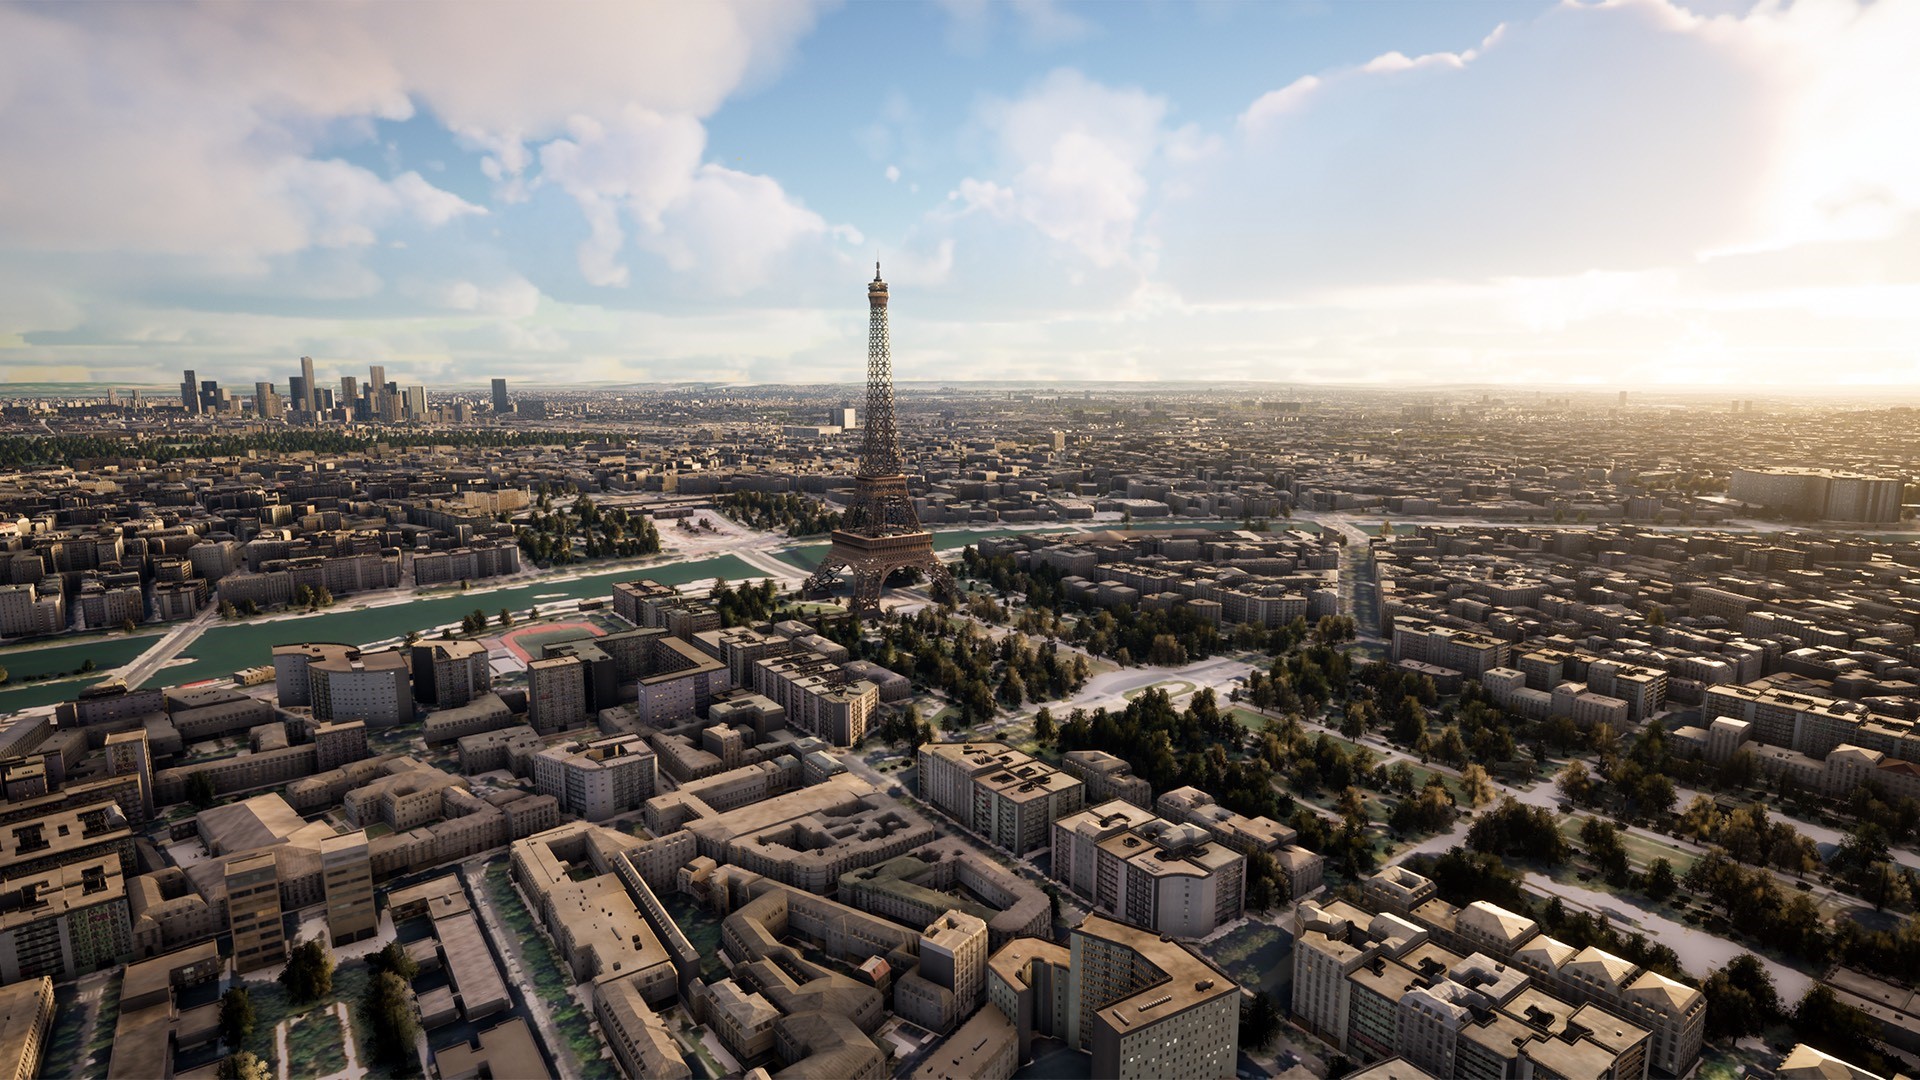 3D model of an area in Paris exported from SYNTH3D.